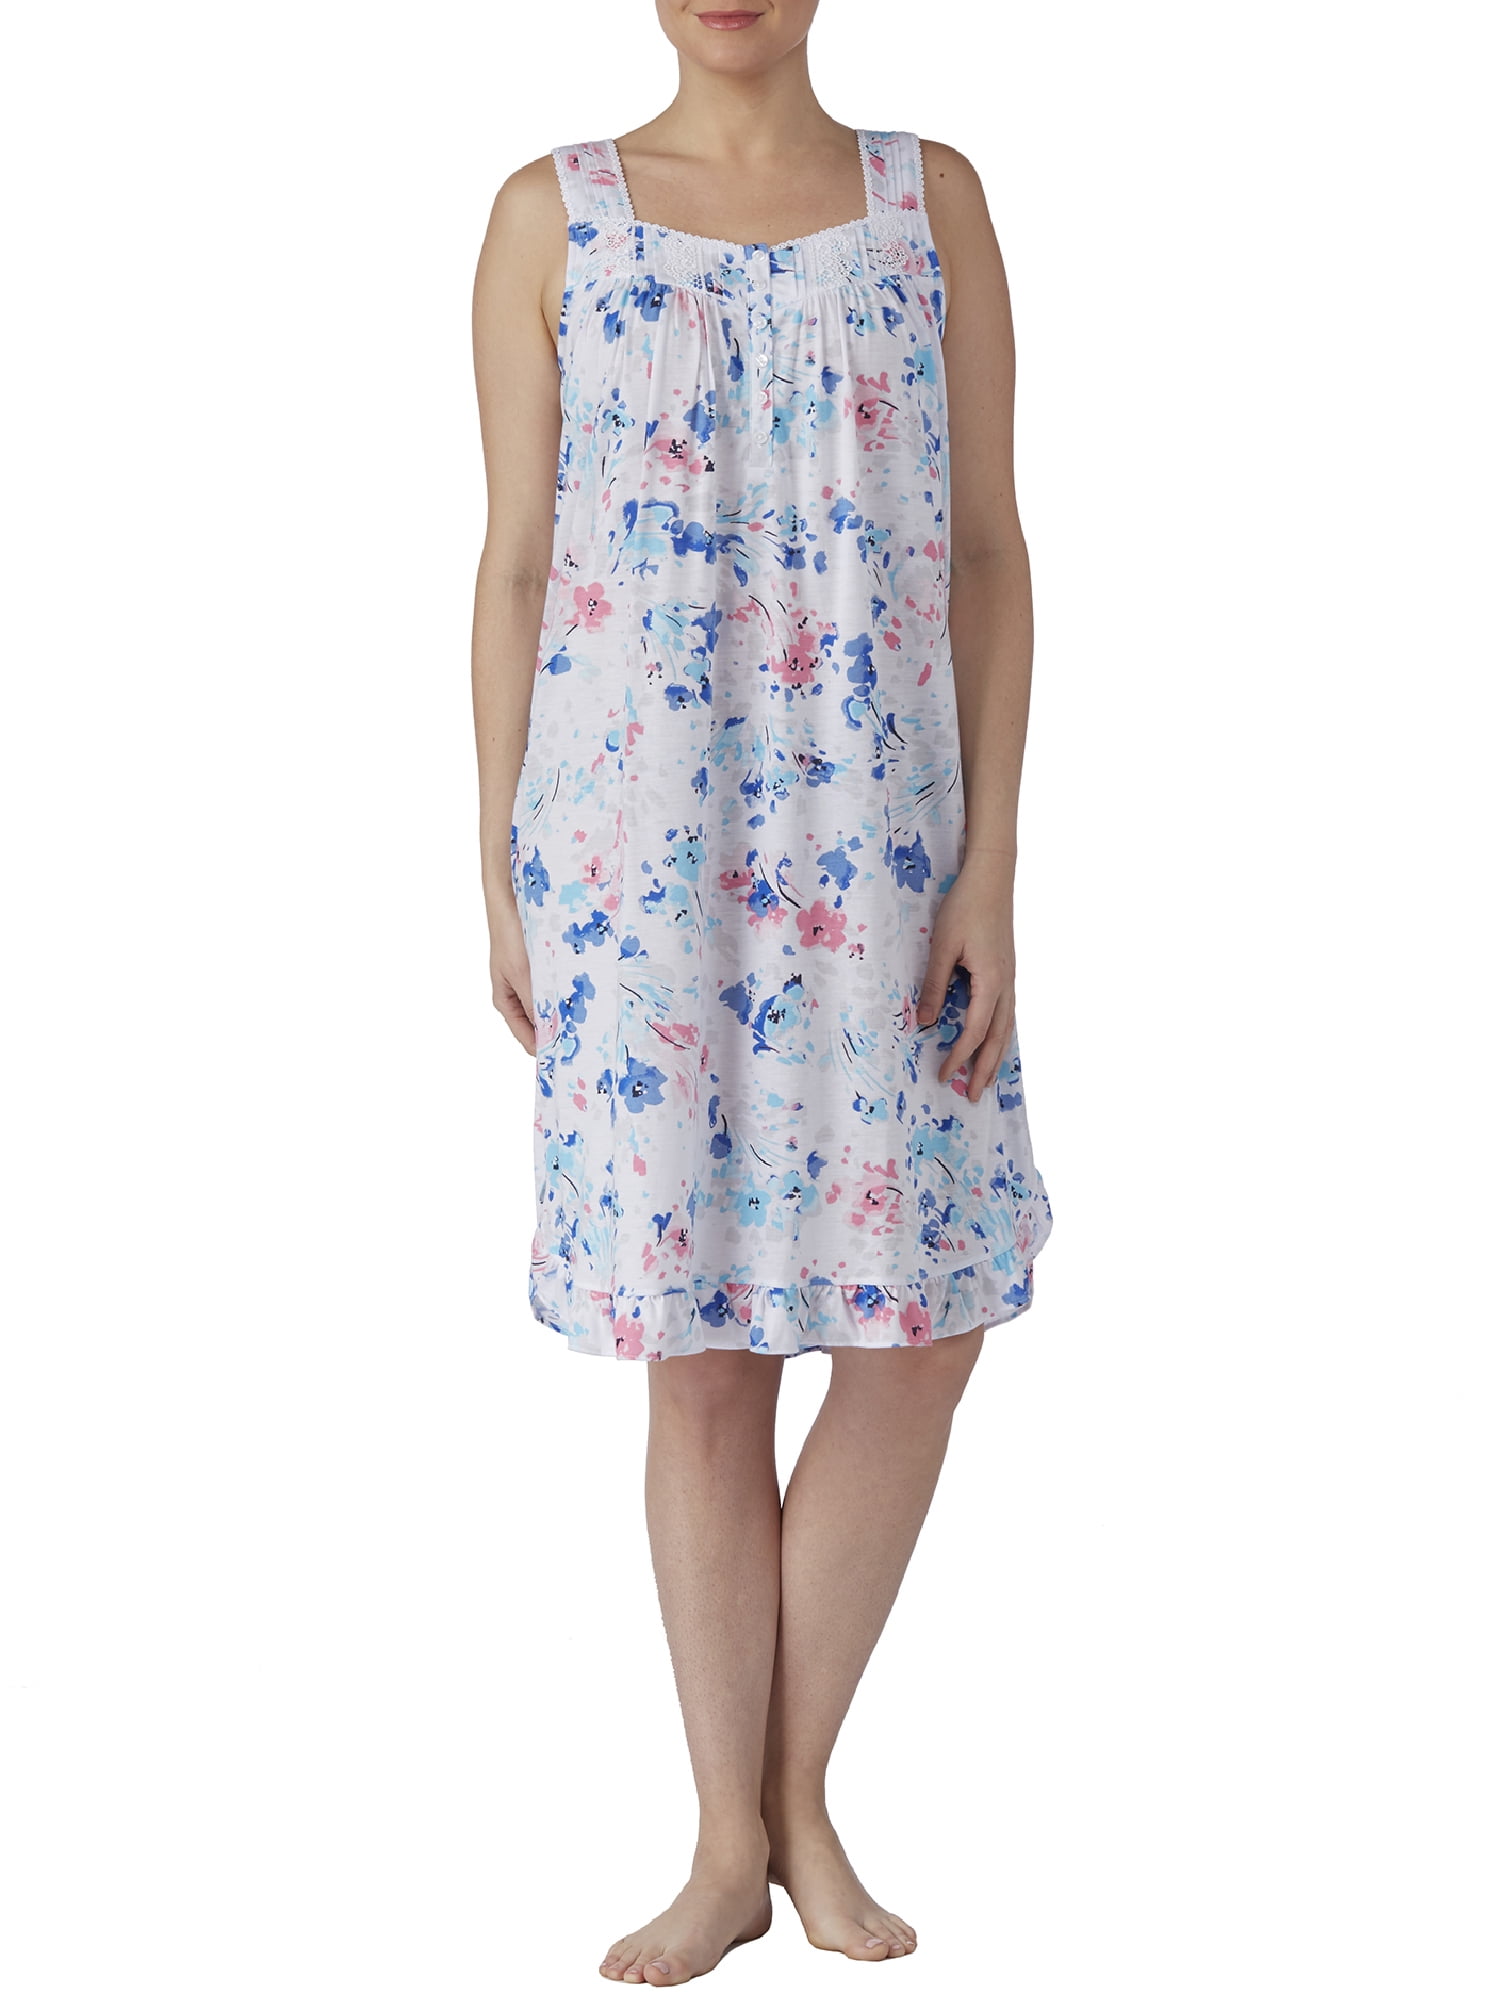 New Secret Treasures Sleeveless Blue Floral Nightgown Size 4X